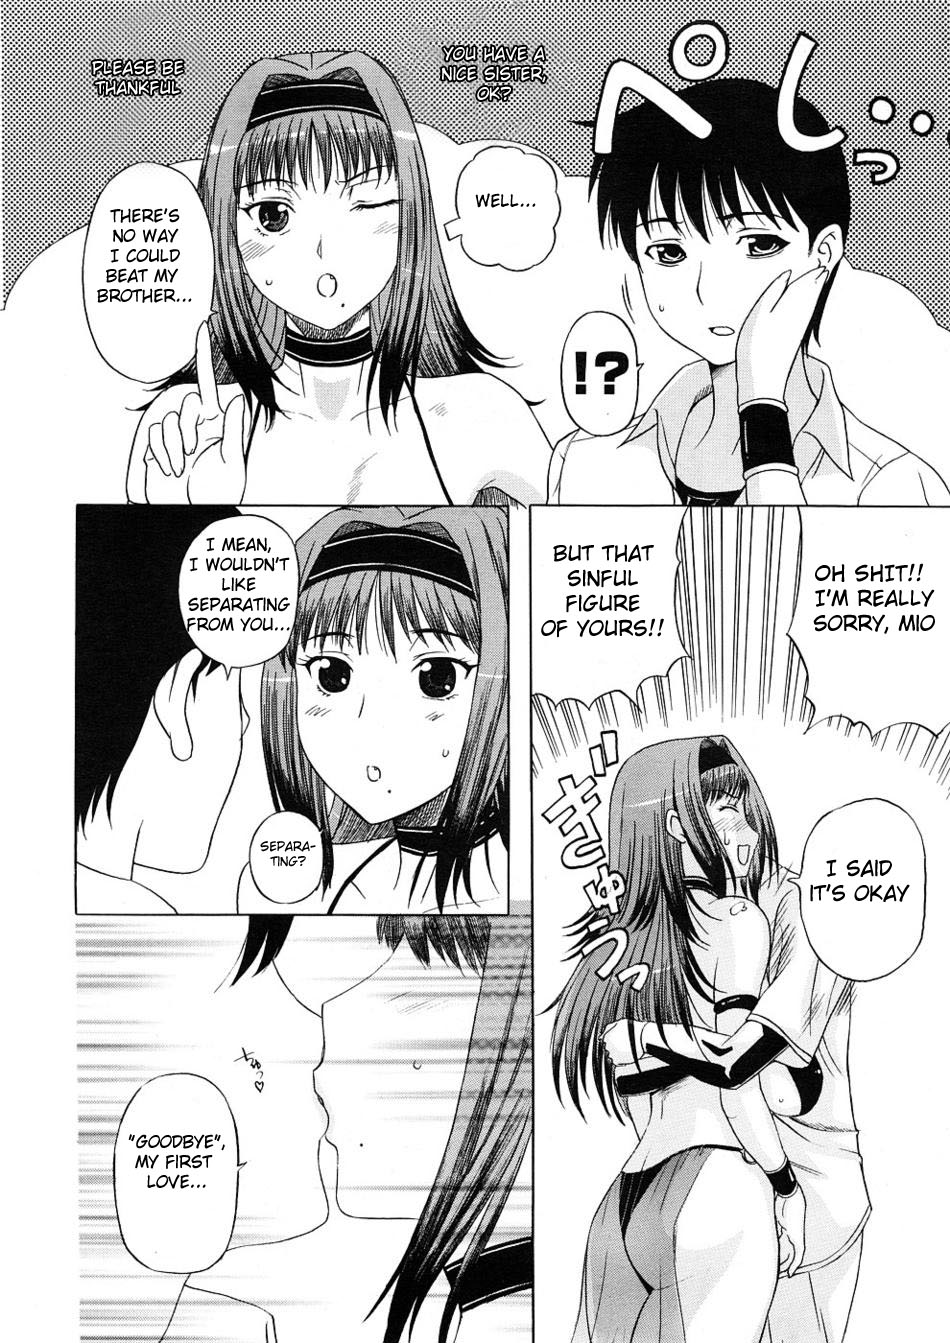 [Kusatsu Terunyo] Imokoi Musou - Younger Sister's Love Hit and Miss [ENG] page 6 full